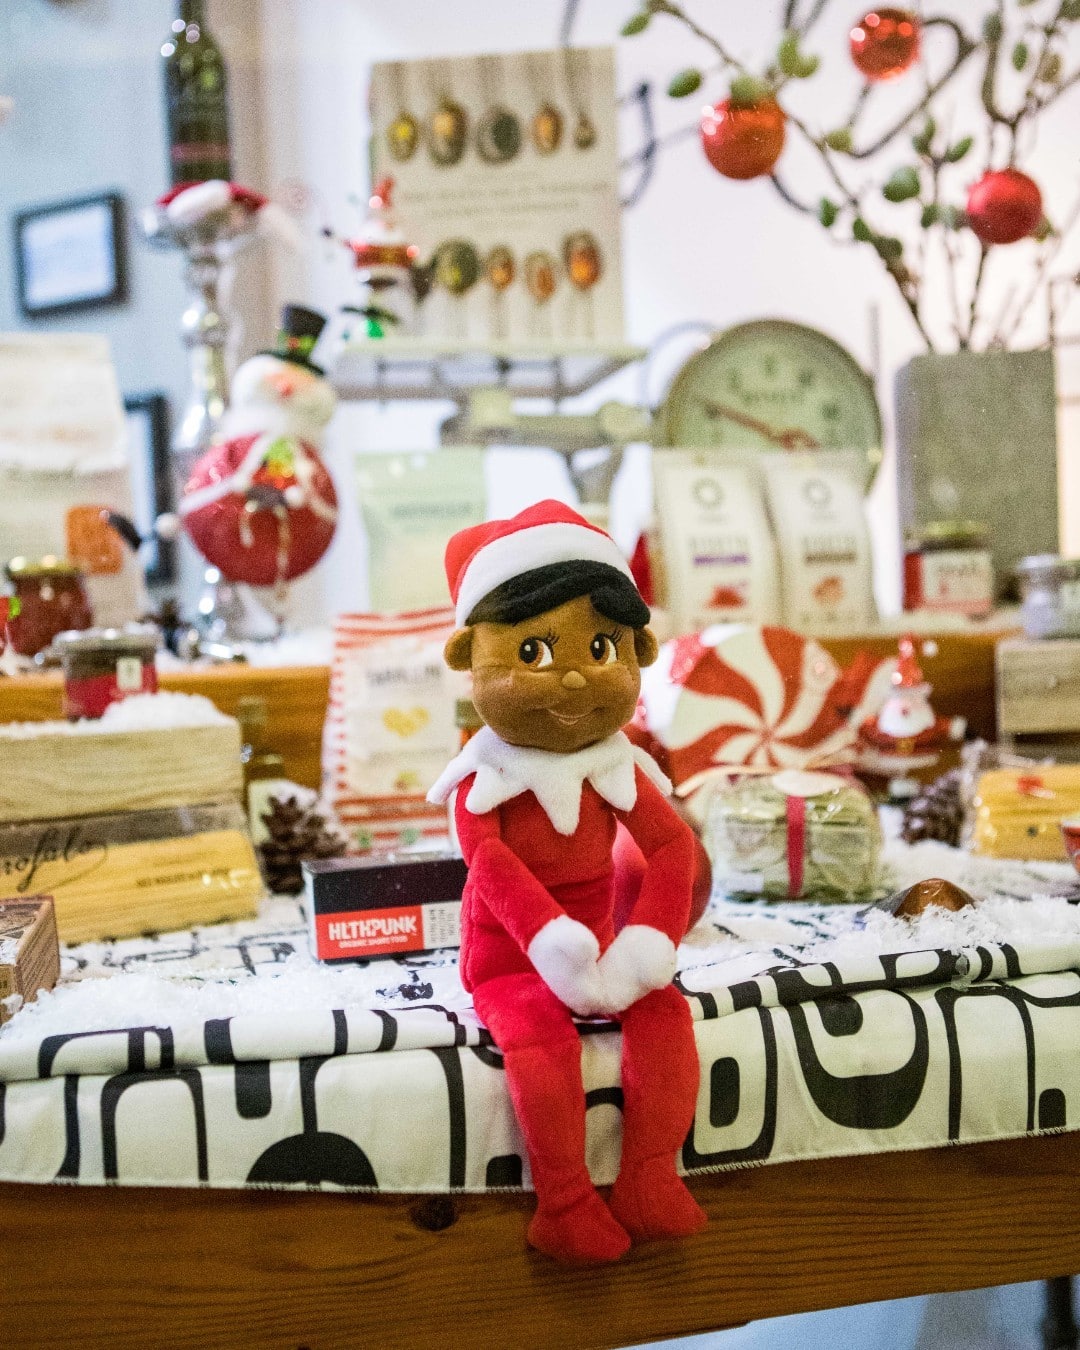 How many hidden elves have you found around the neighborhood? Participate in our Elf Scavenger Hunt now through December 16 for a chance to win a $100 gift card to the Ward Village store or restaurant of your choosing! Click the link in our bio for all the details.